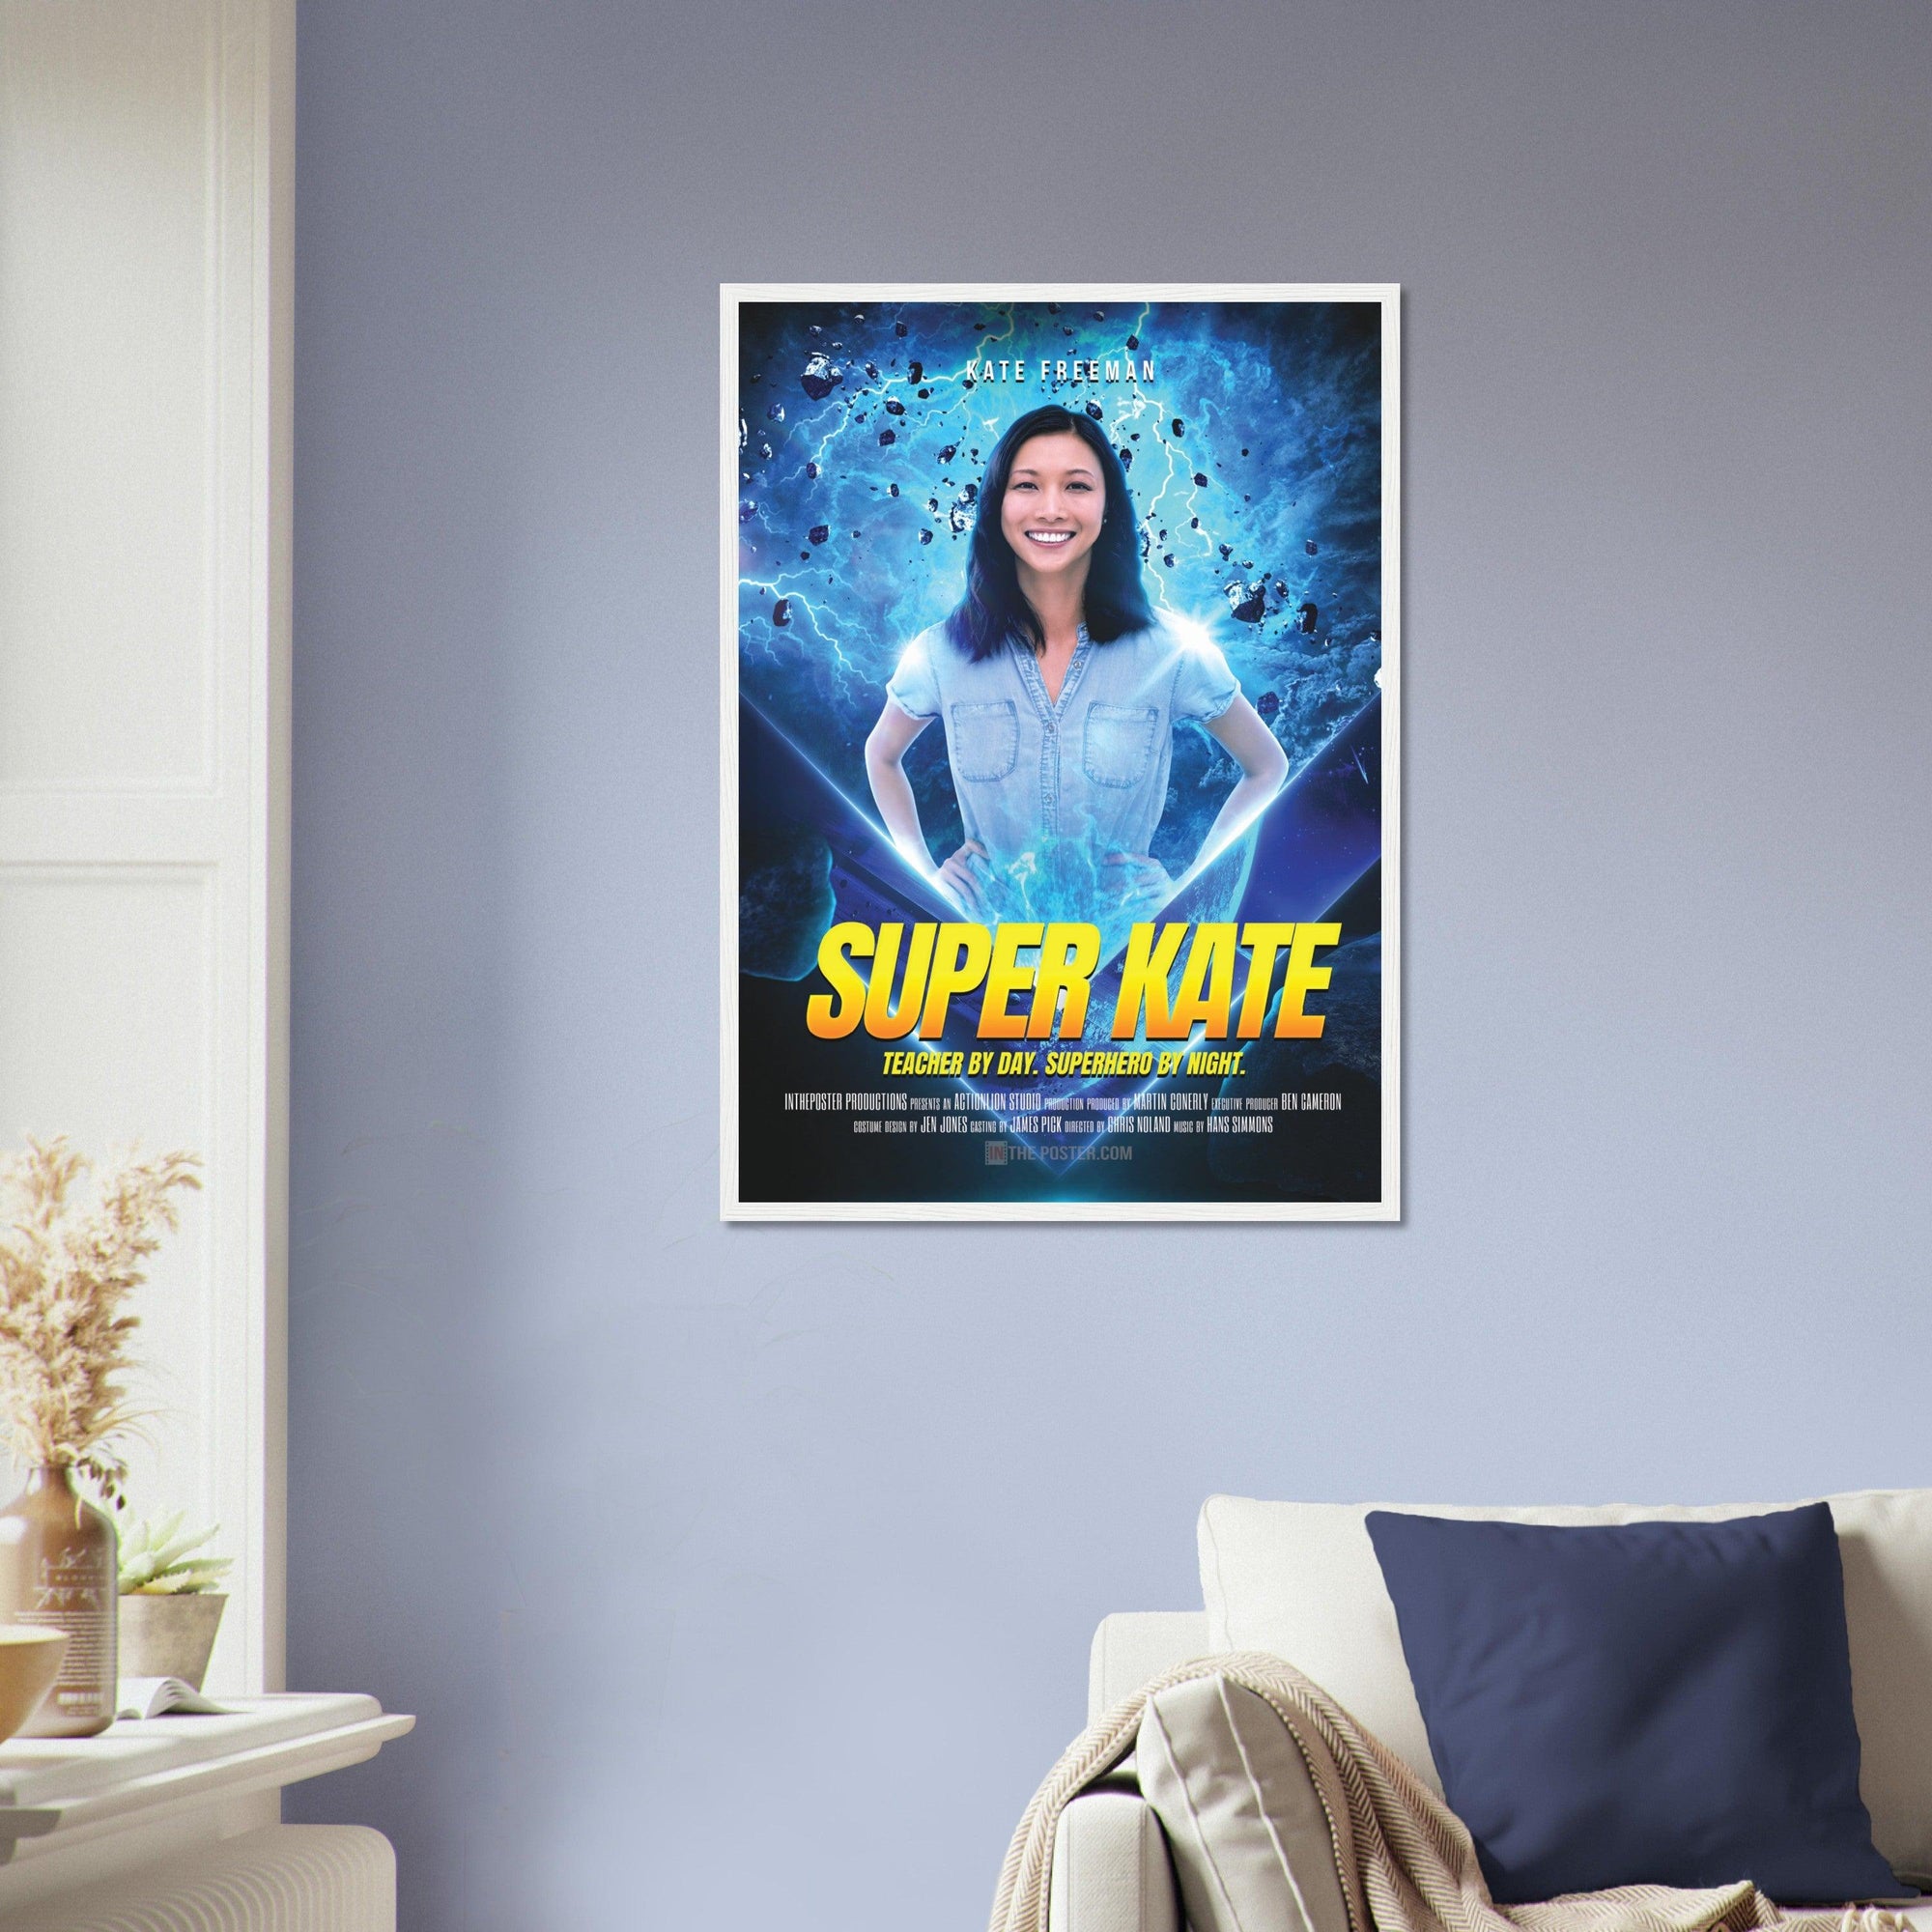 The Super Hero Custom Movie Poster design in a white frame in size regular, on the wall above a beige sofa and blue cushion